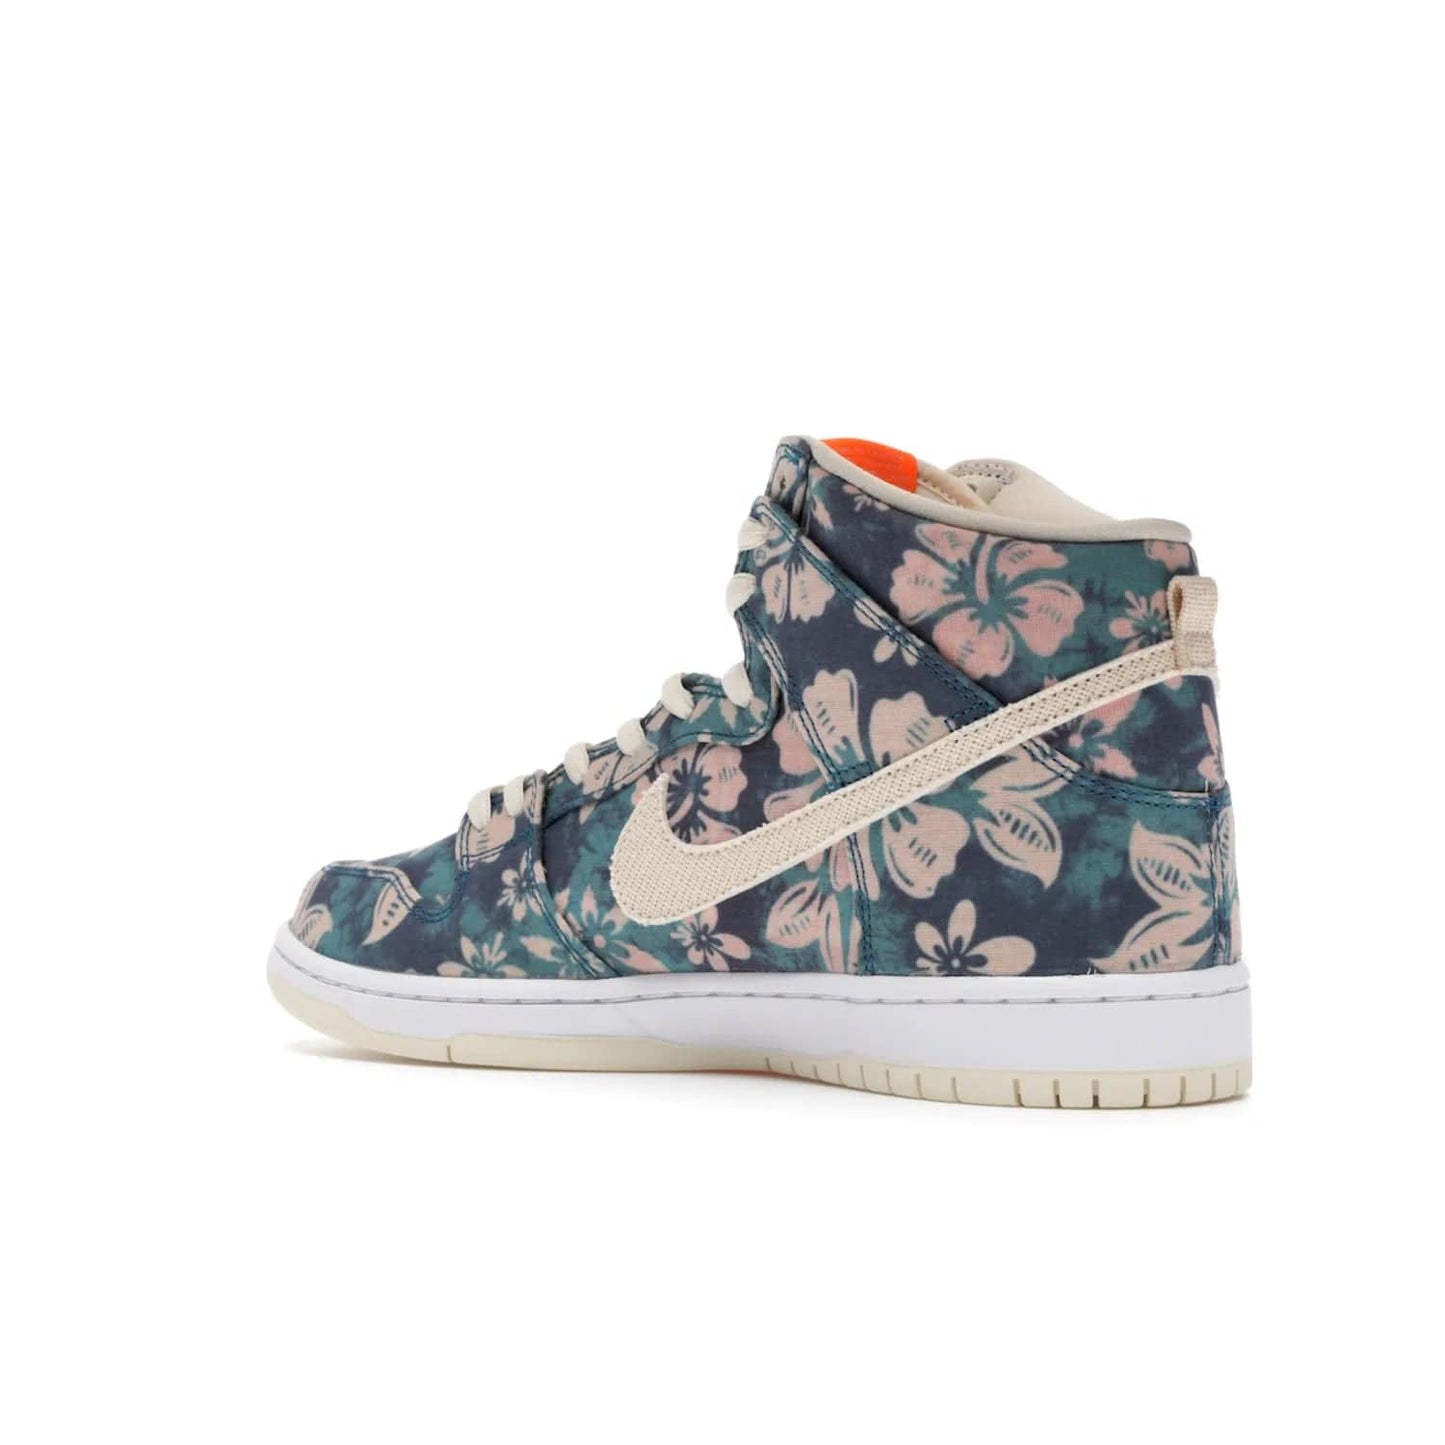 Nike SB Dunk High Hawaii - Image 23 - Only at www.BallersClubKickz.com - Introducing the Nike SB Dunk High Hawaii, a colorway celebrating an island paradise. This hybrid silhouette brings together tropical vibes with a sun-soaked look. Blue, green, pink and orange on a sail and white outsole. Get your island vibes with the Nike SB Dunk High Hawaii.